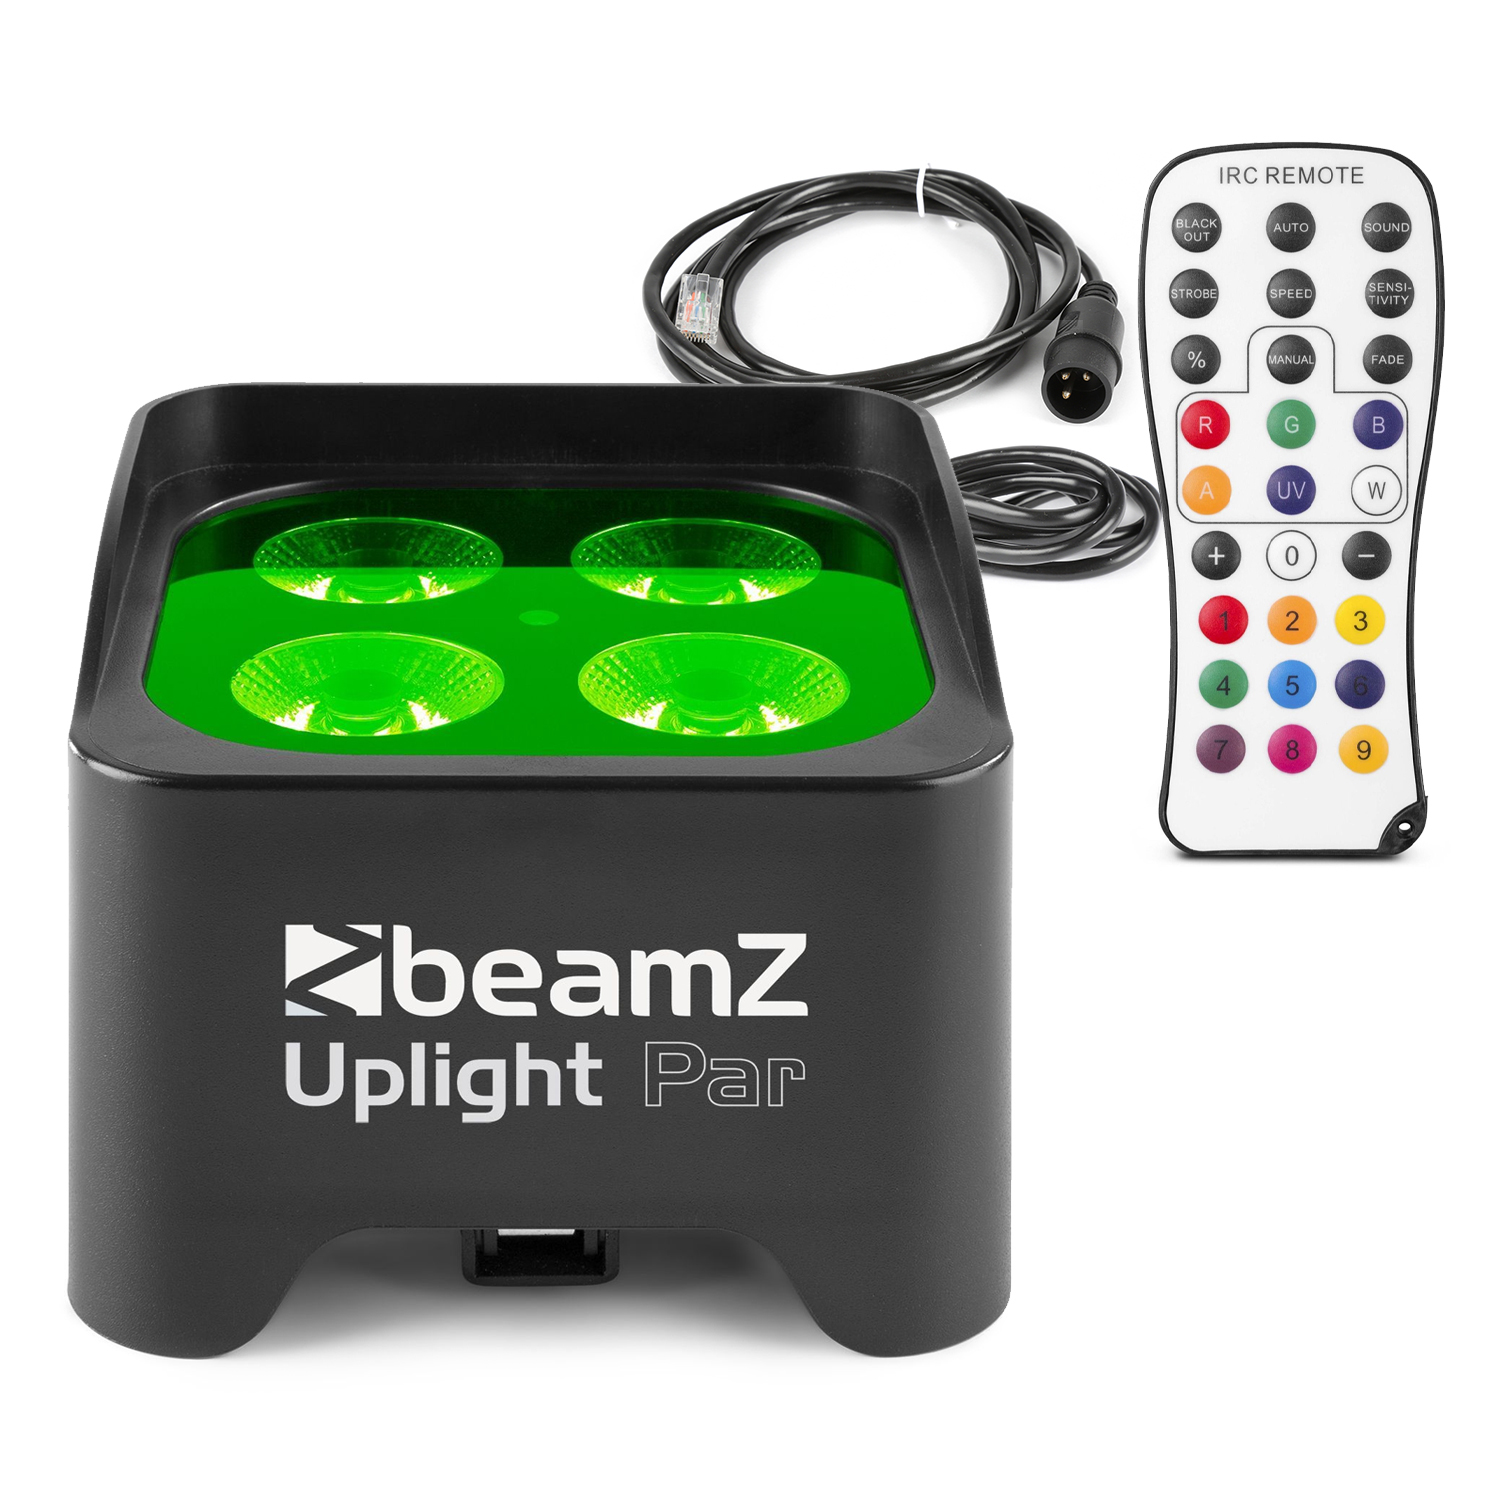 Wireless Battery 4 - Stage 4W BBP90 x Uplighter - LEDs Concepts BeamZ RGB-UV